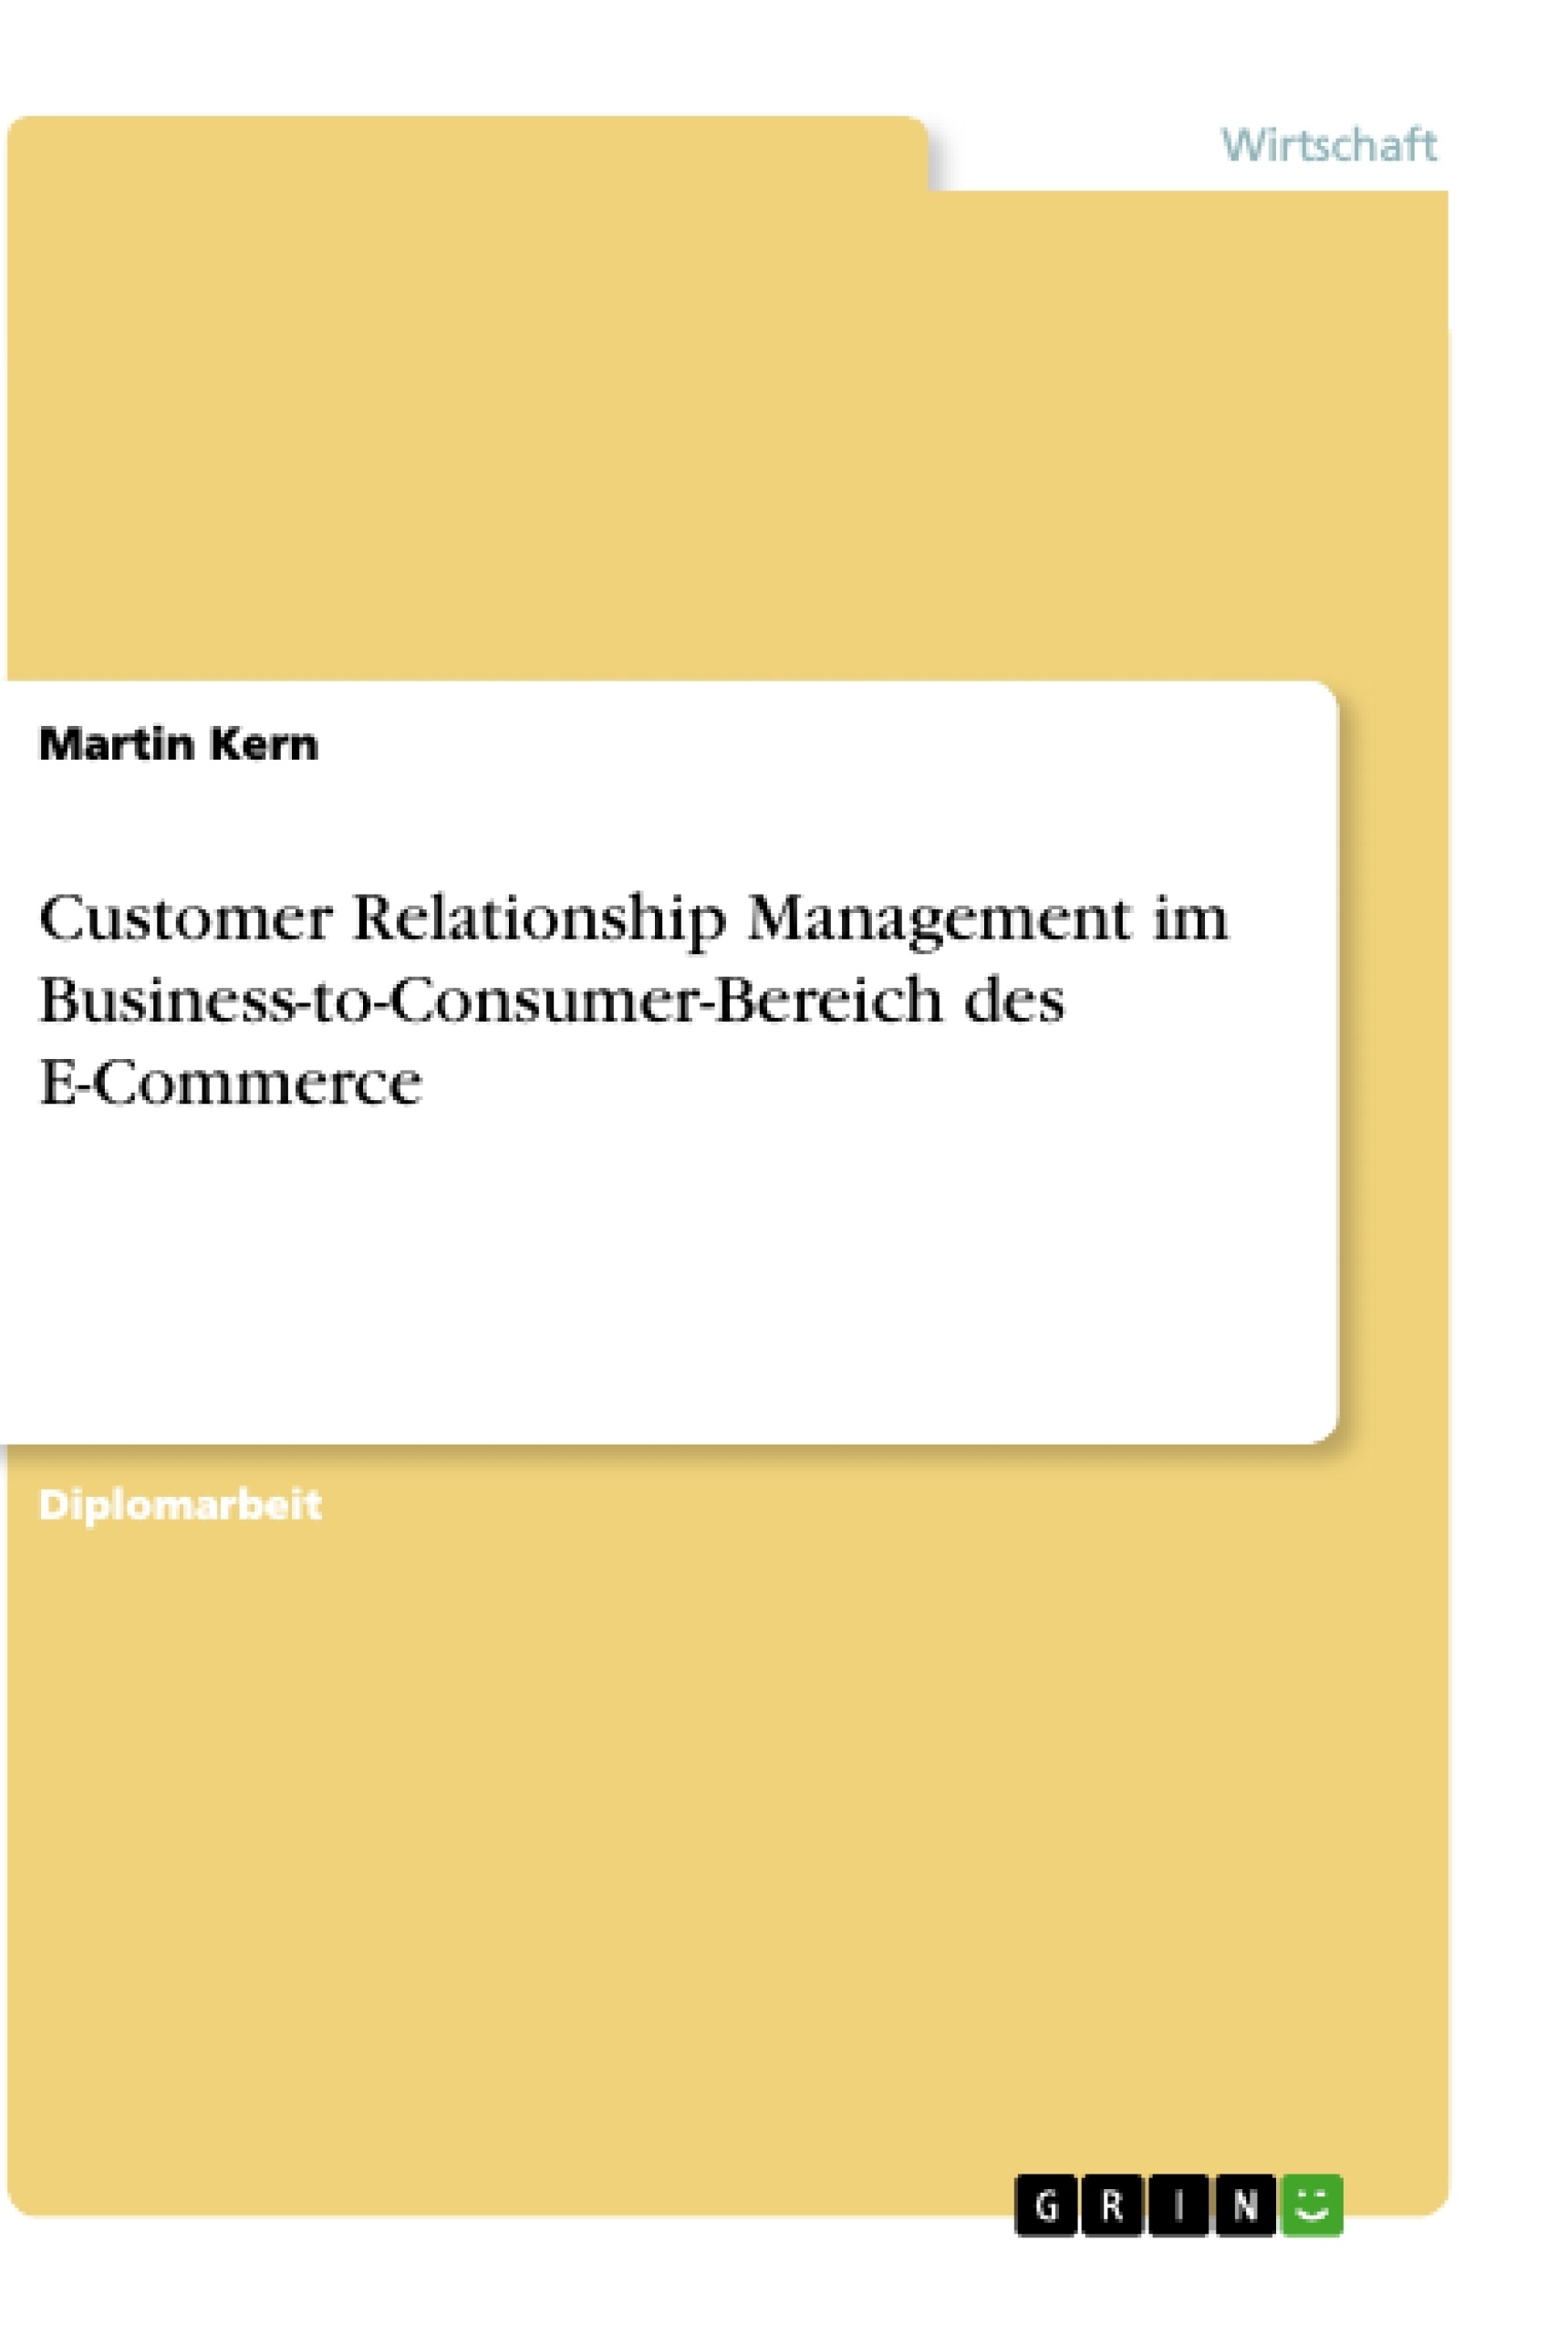 Title: Customer Relationship Management im Business-to-Consumer-Bereich des E-Commerce